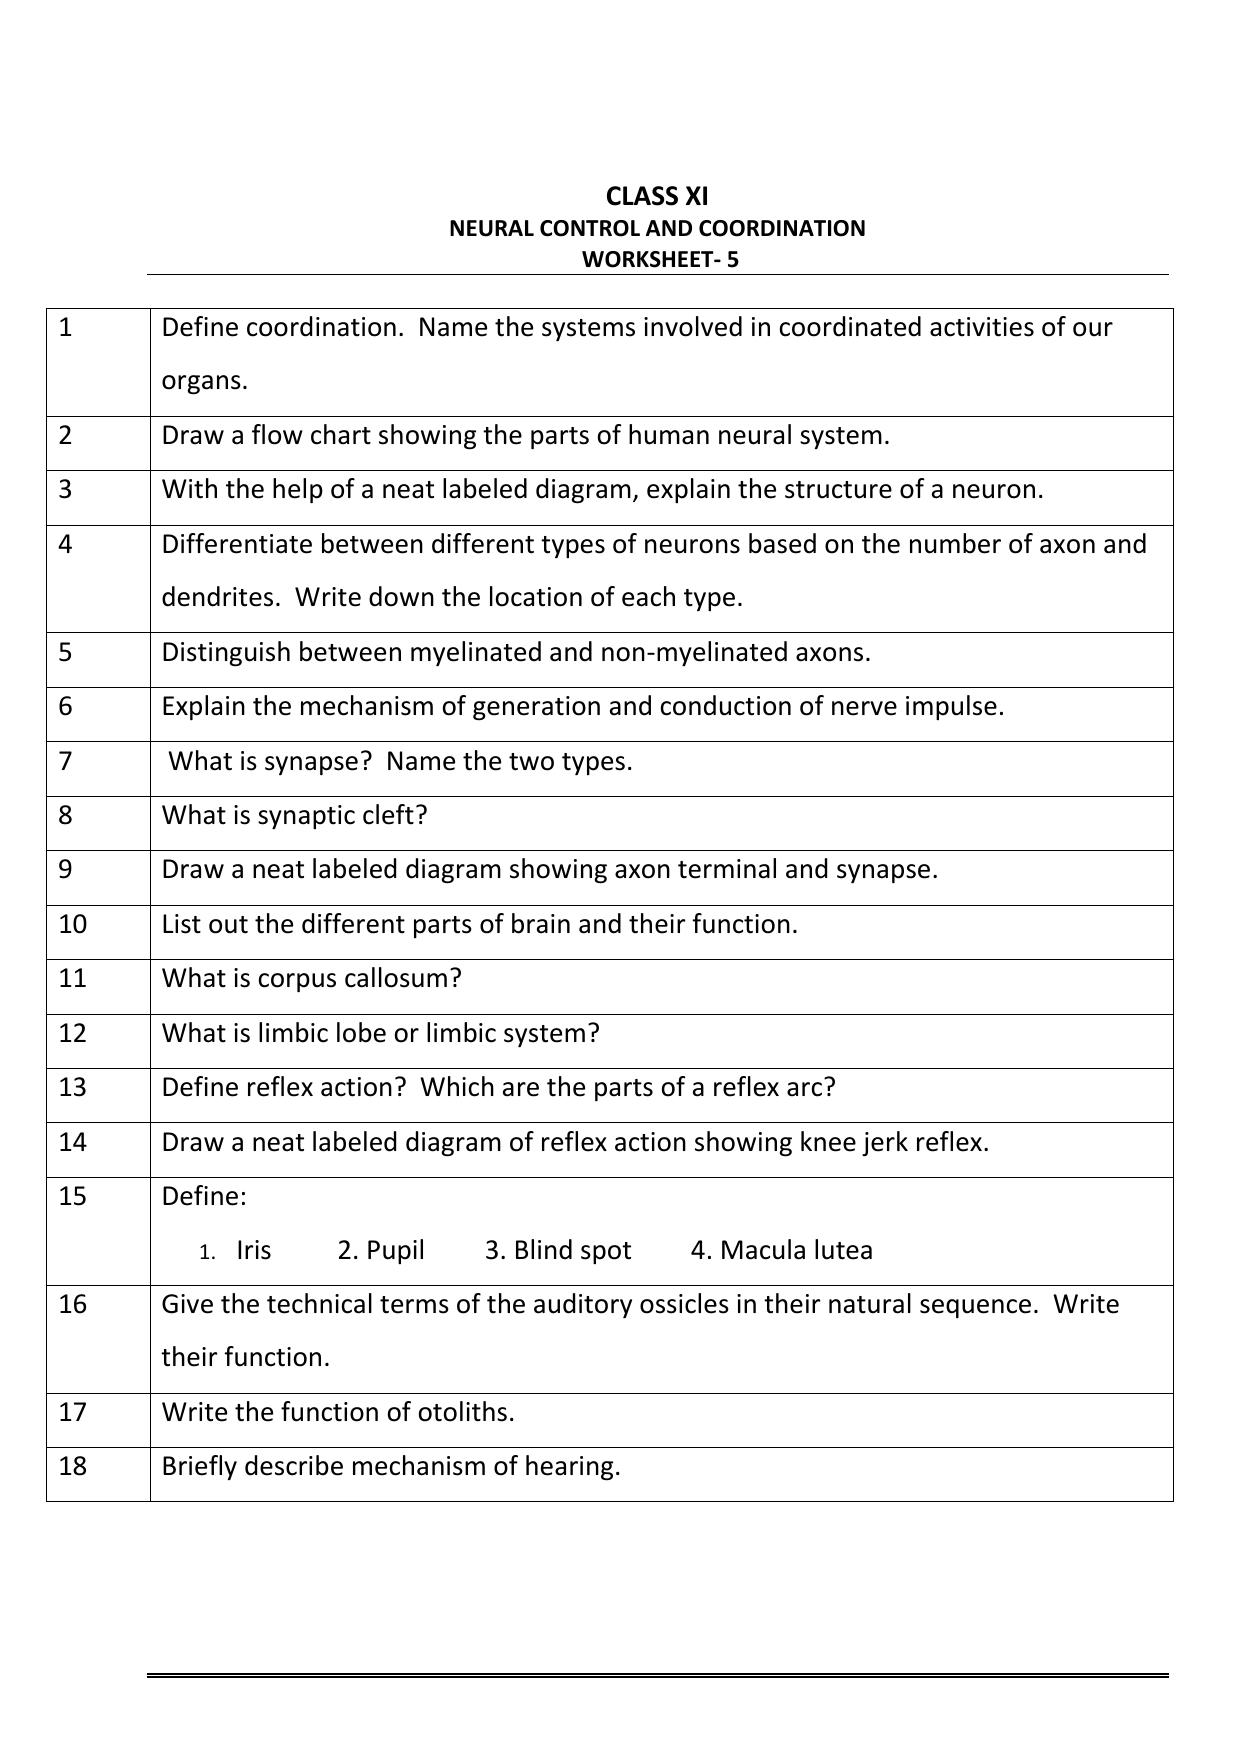 CBSE Worksheets for Class 11 Biology Neural Control and Coordination Assignment - Page 1